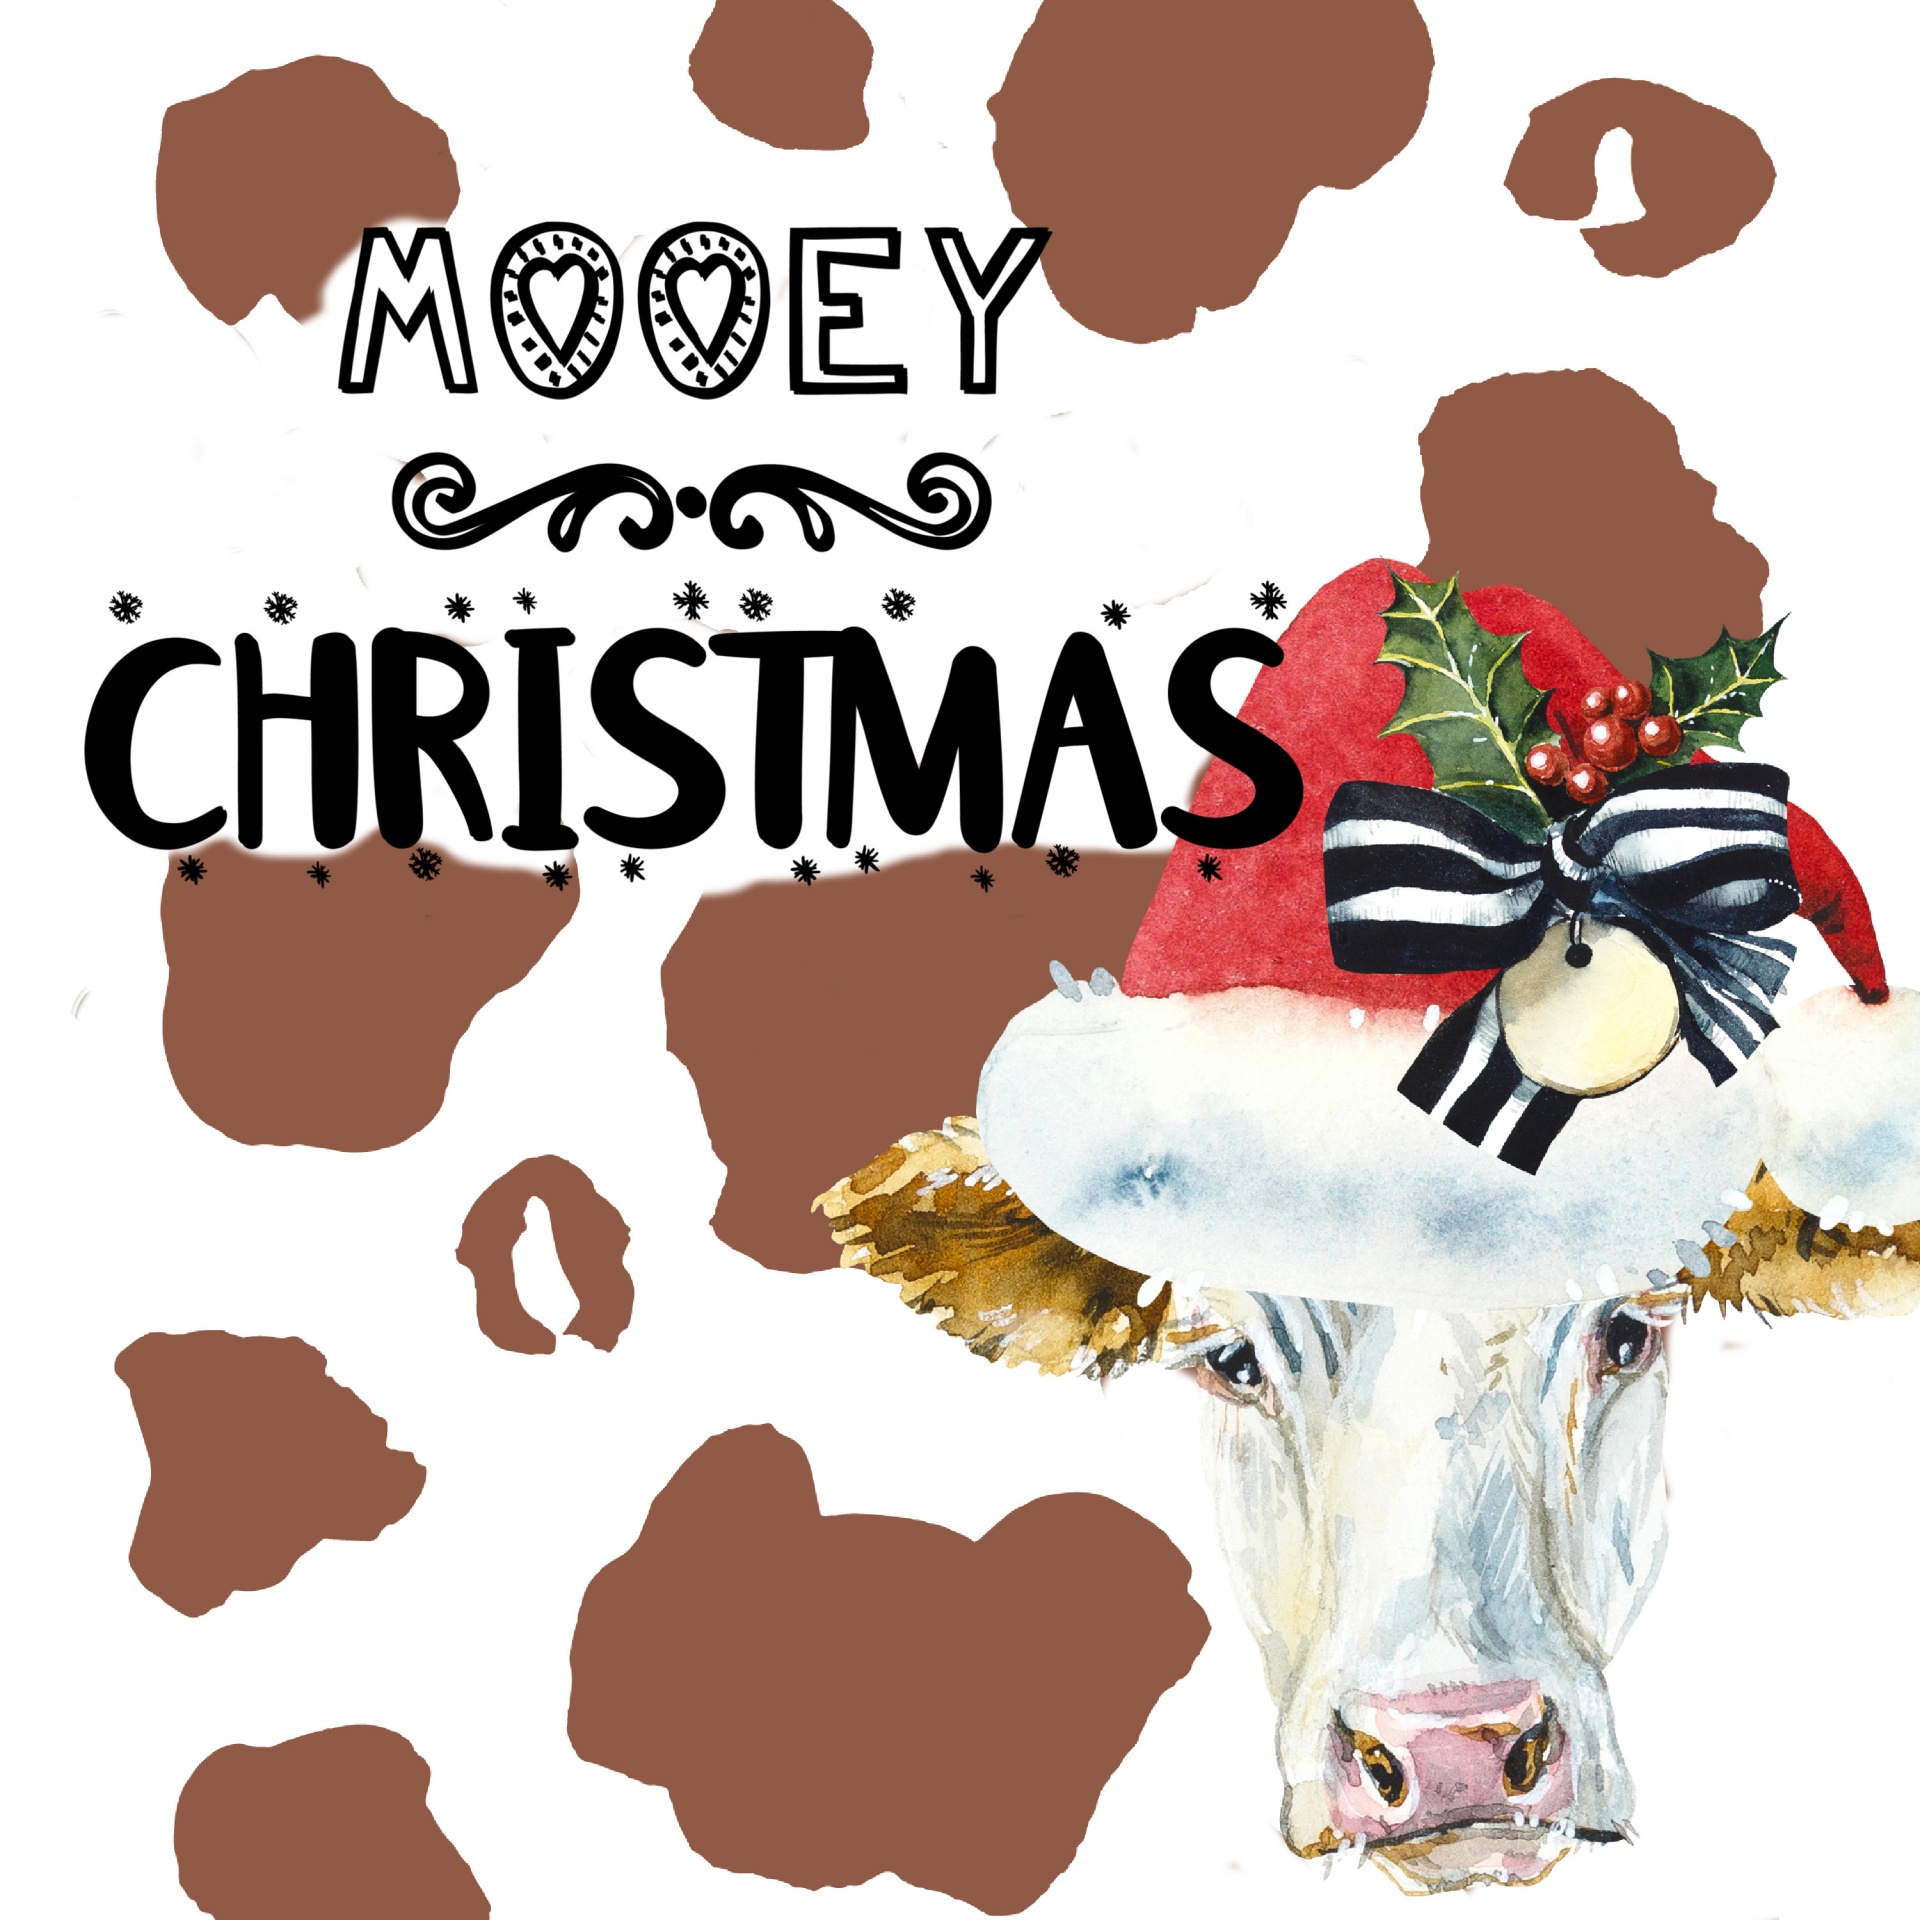 darling face of a cow wearing a Santa Claus hat with words MOOEY CHRISTMAS